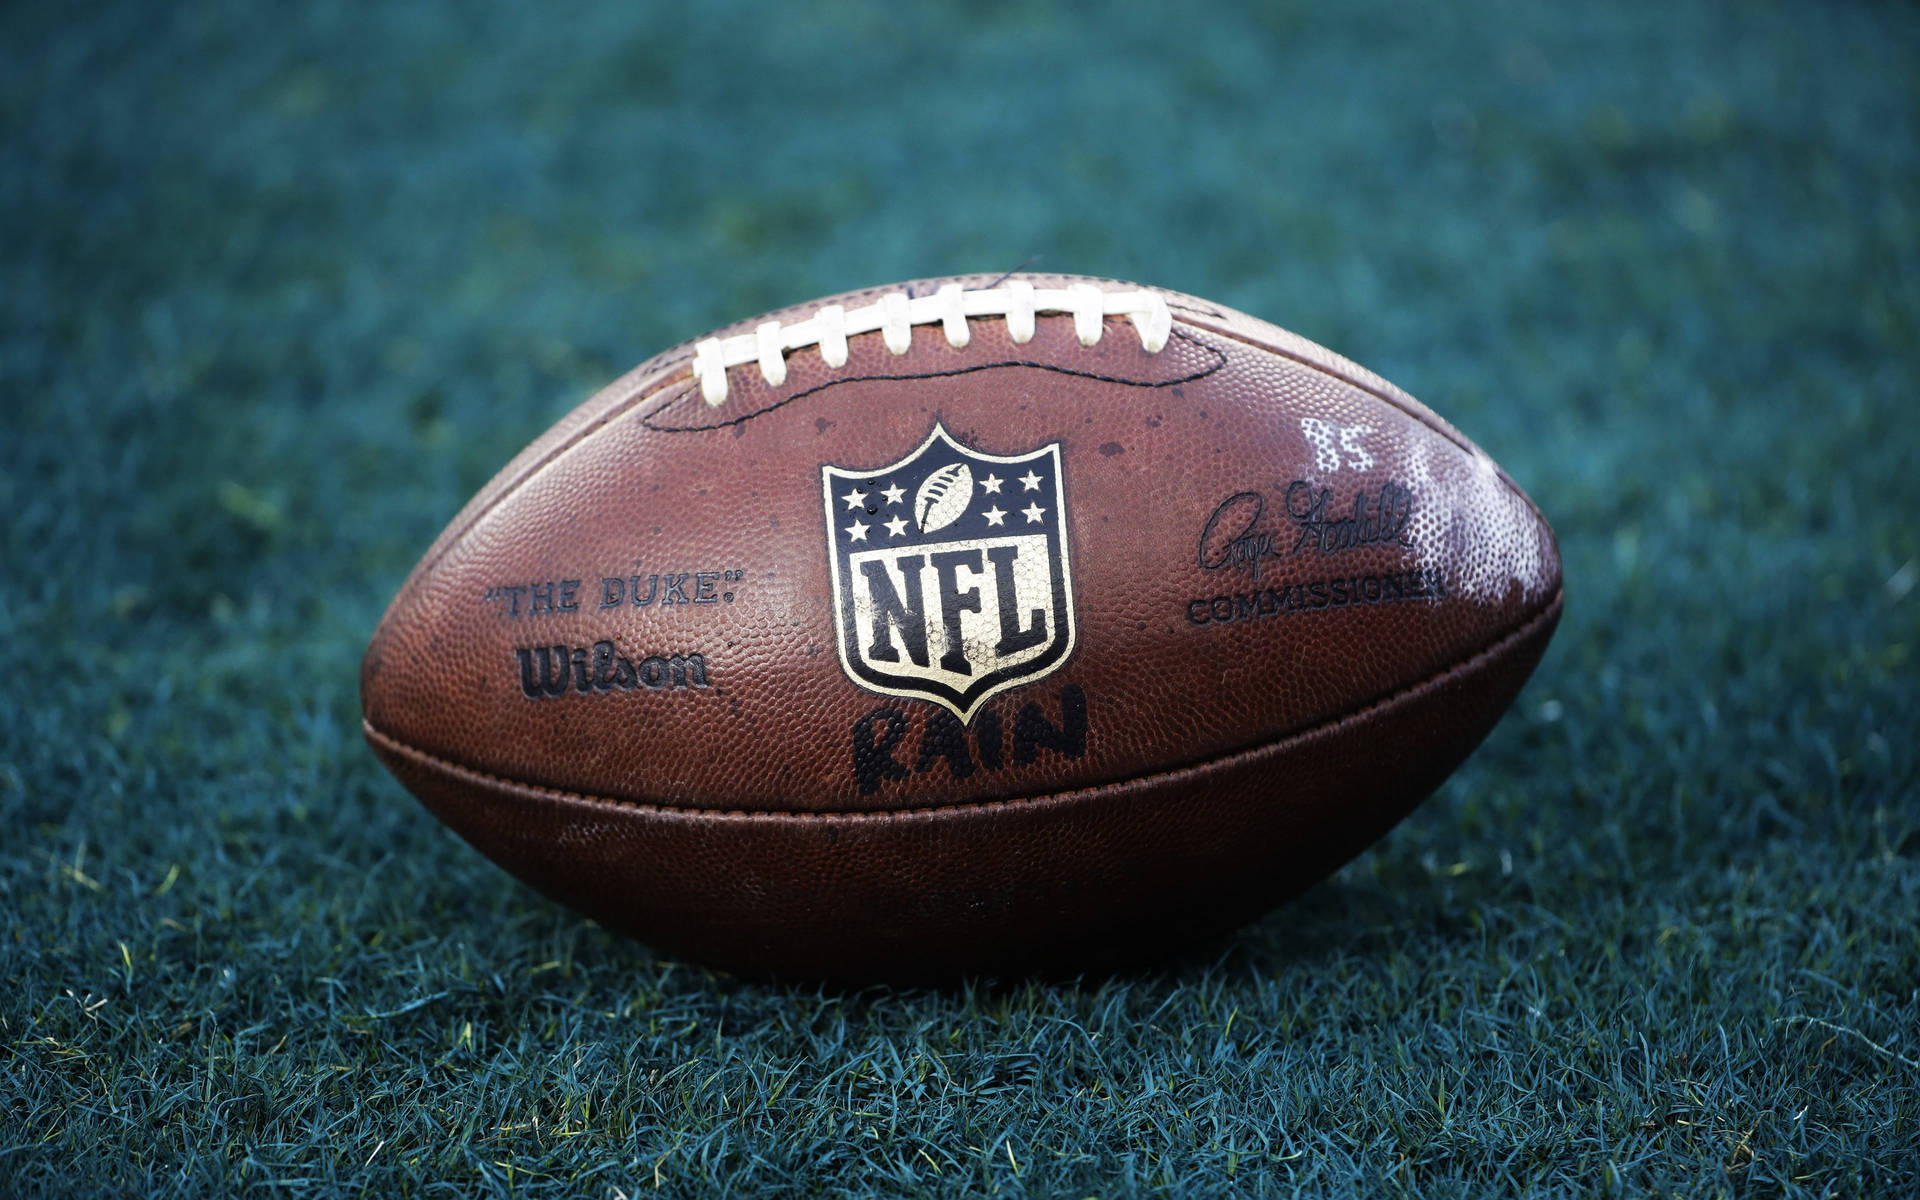 Football Ball With Nfl Iphone Background